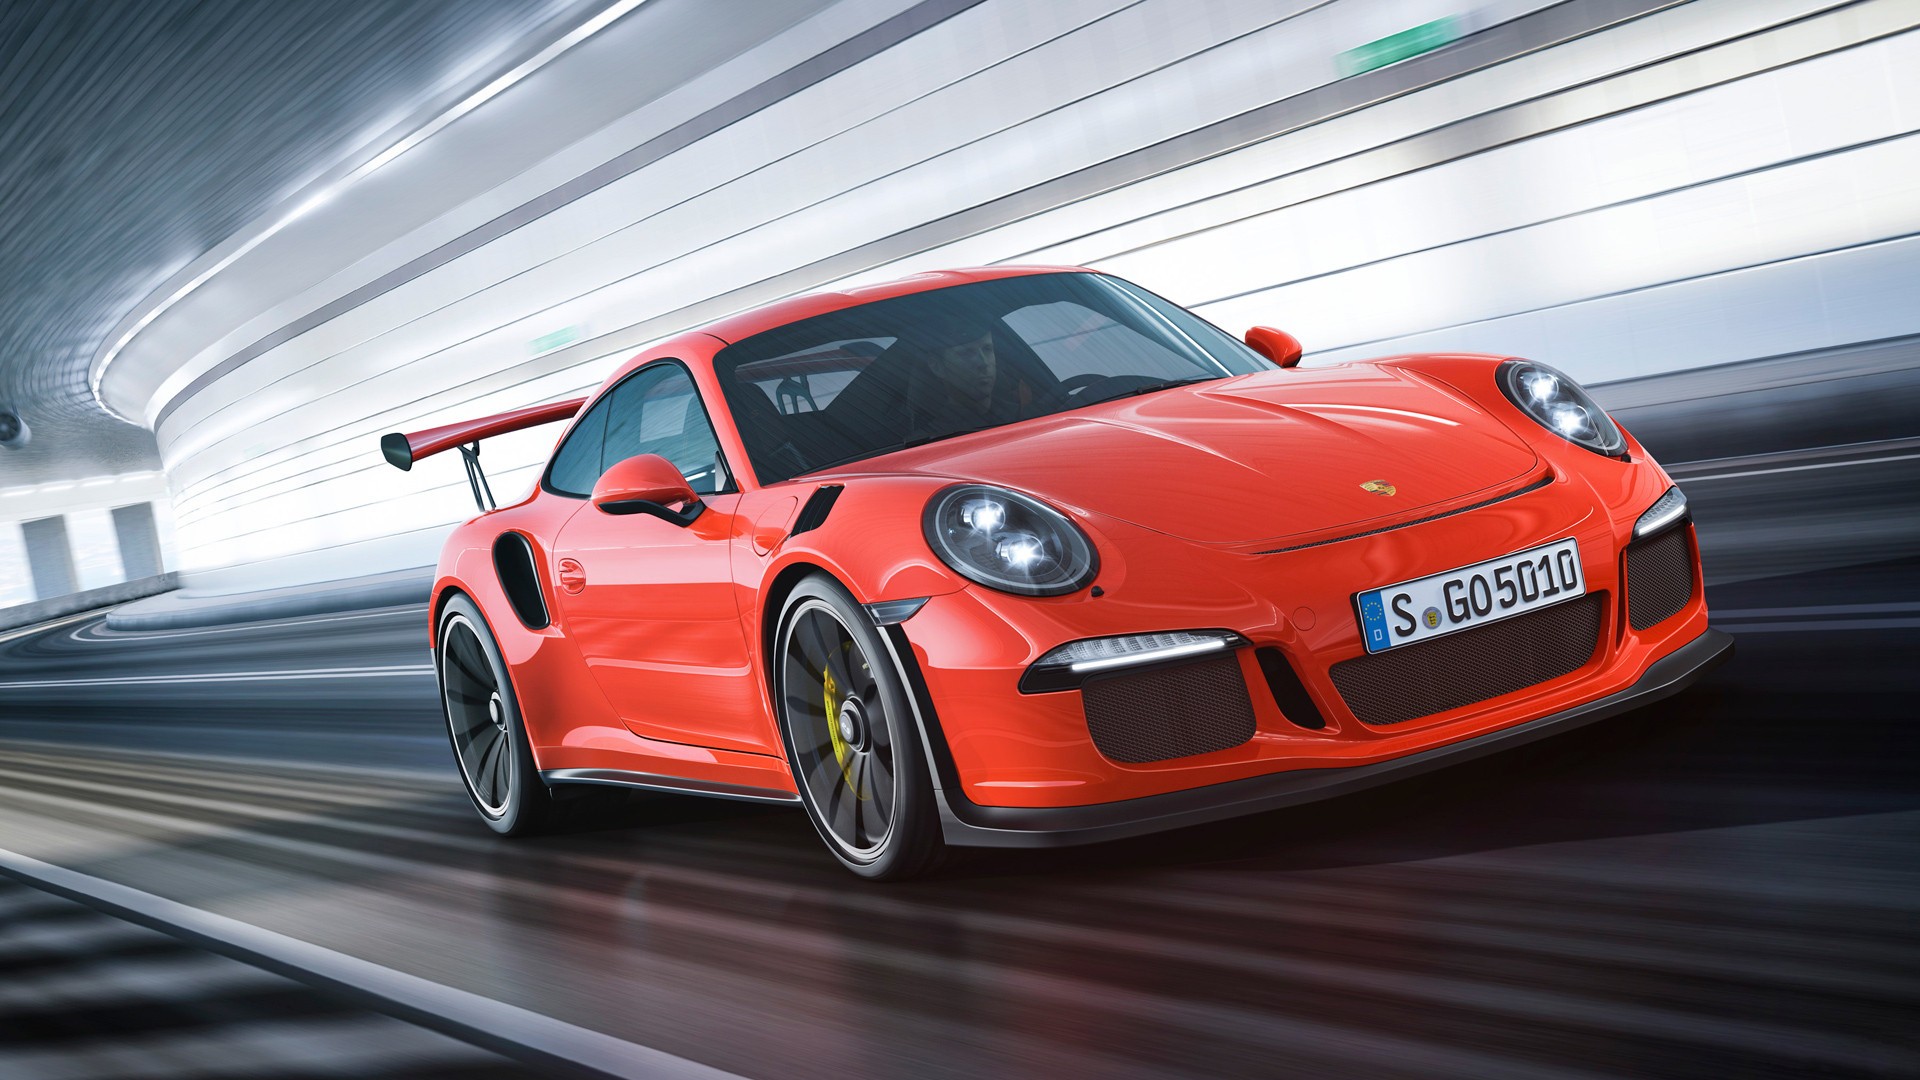 Porsche 911 GT3 RS, Car, Red Cars Wallpapers HD / Desktop and Mobile